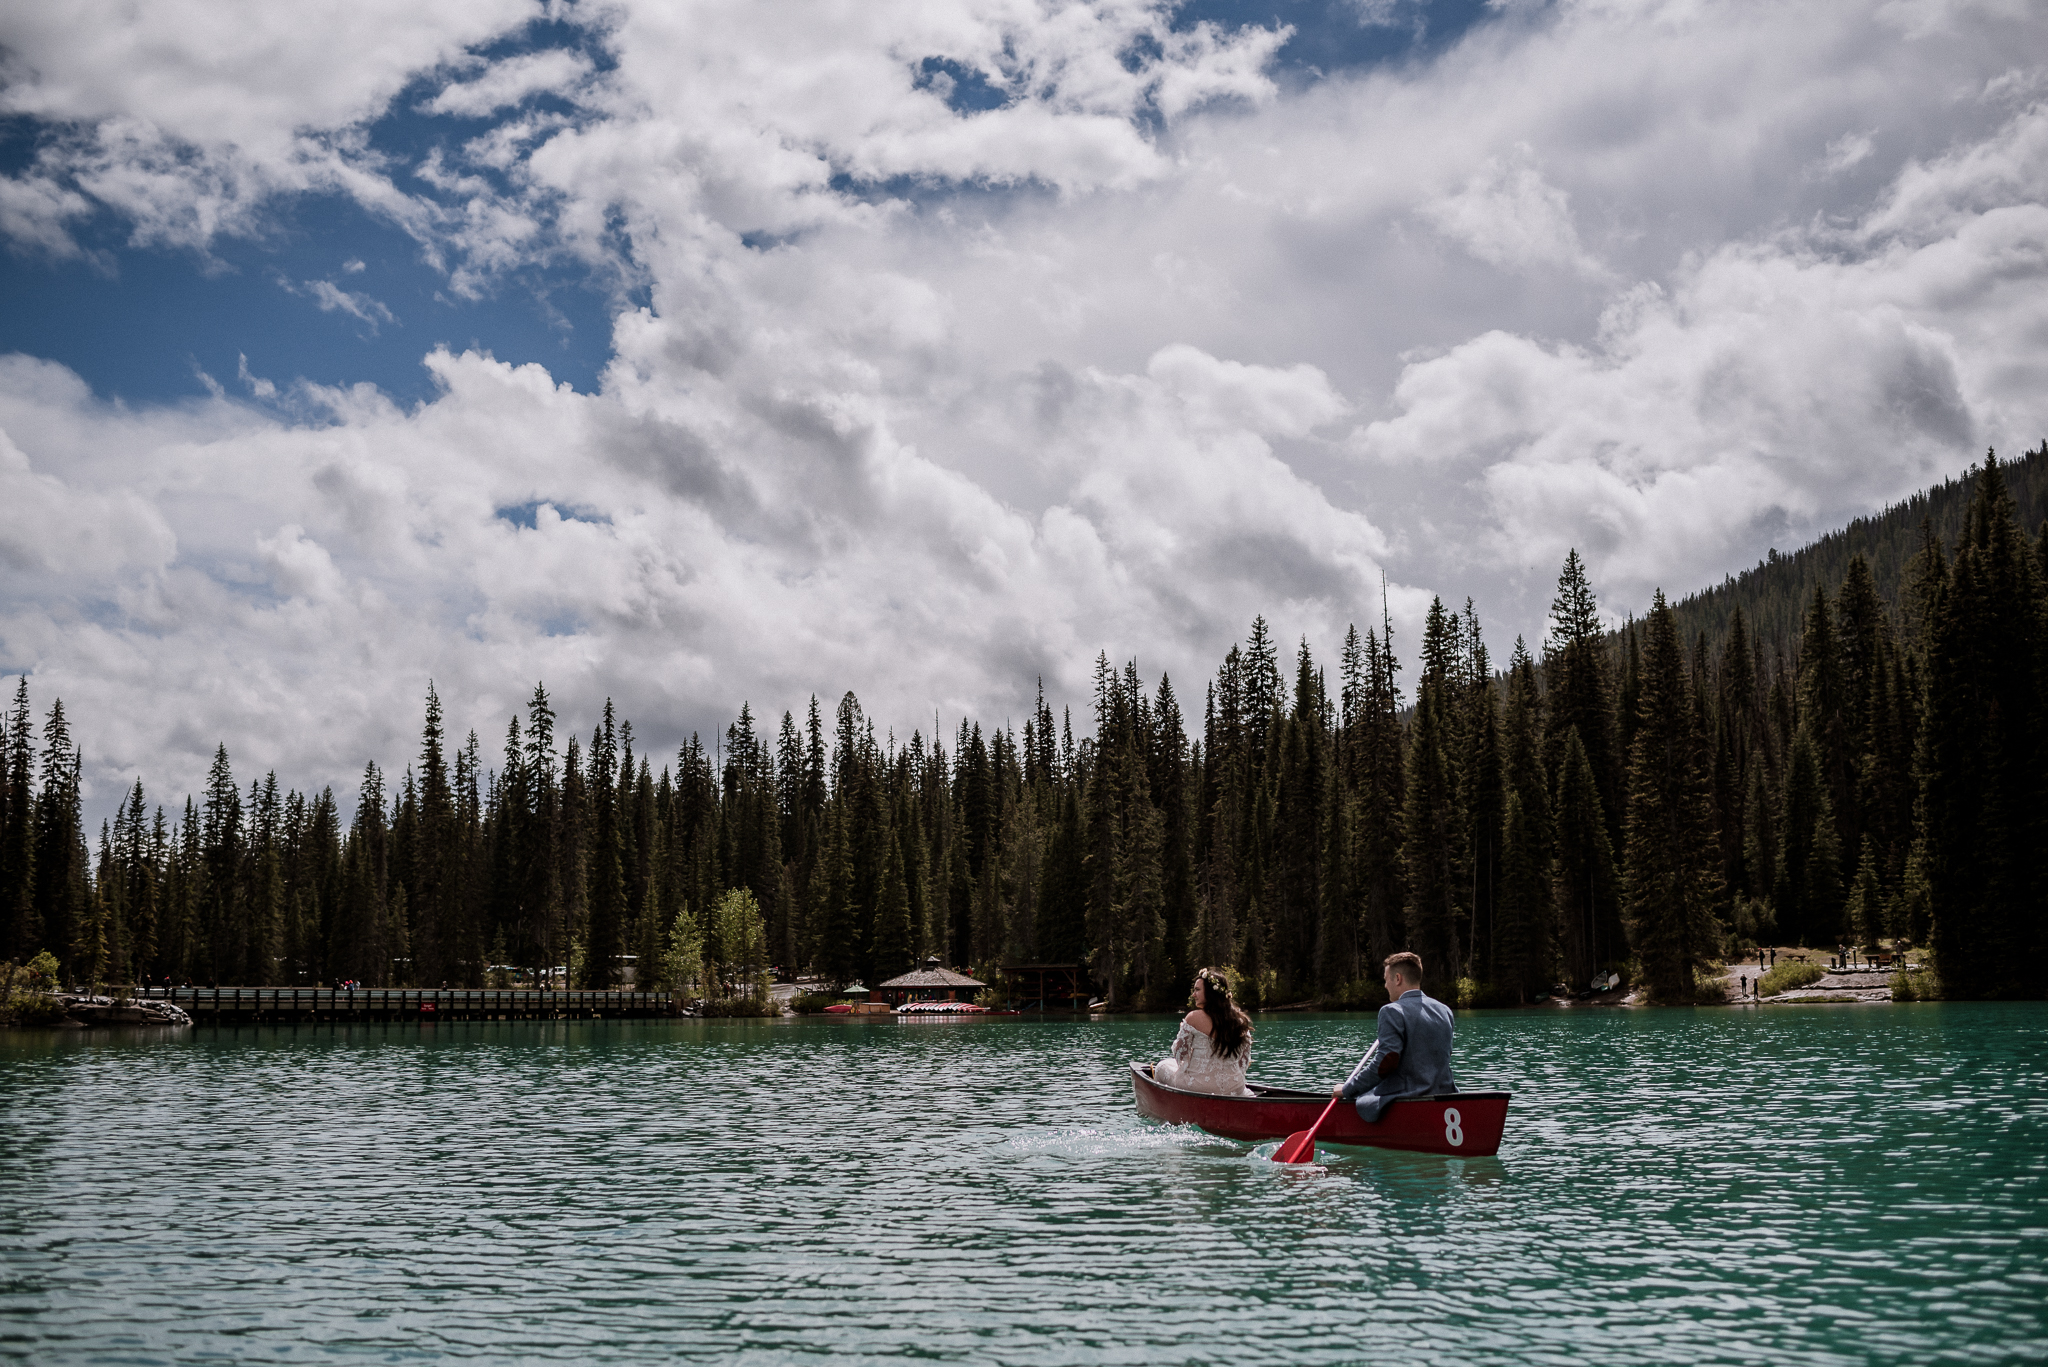 Bride and groom canoeing in the sun at Emerald Lake, BC